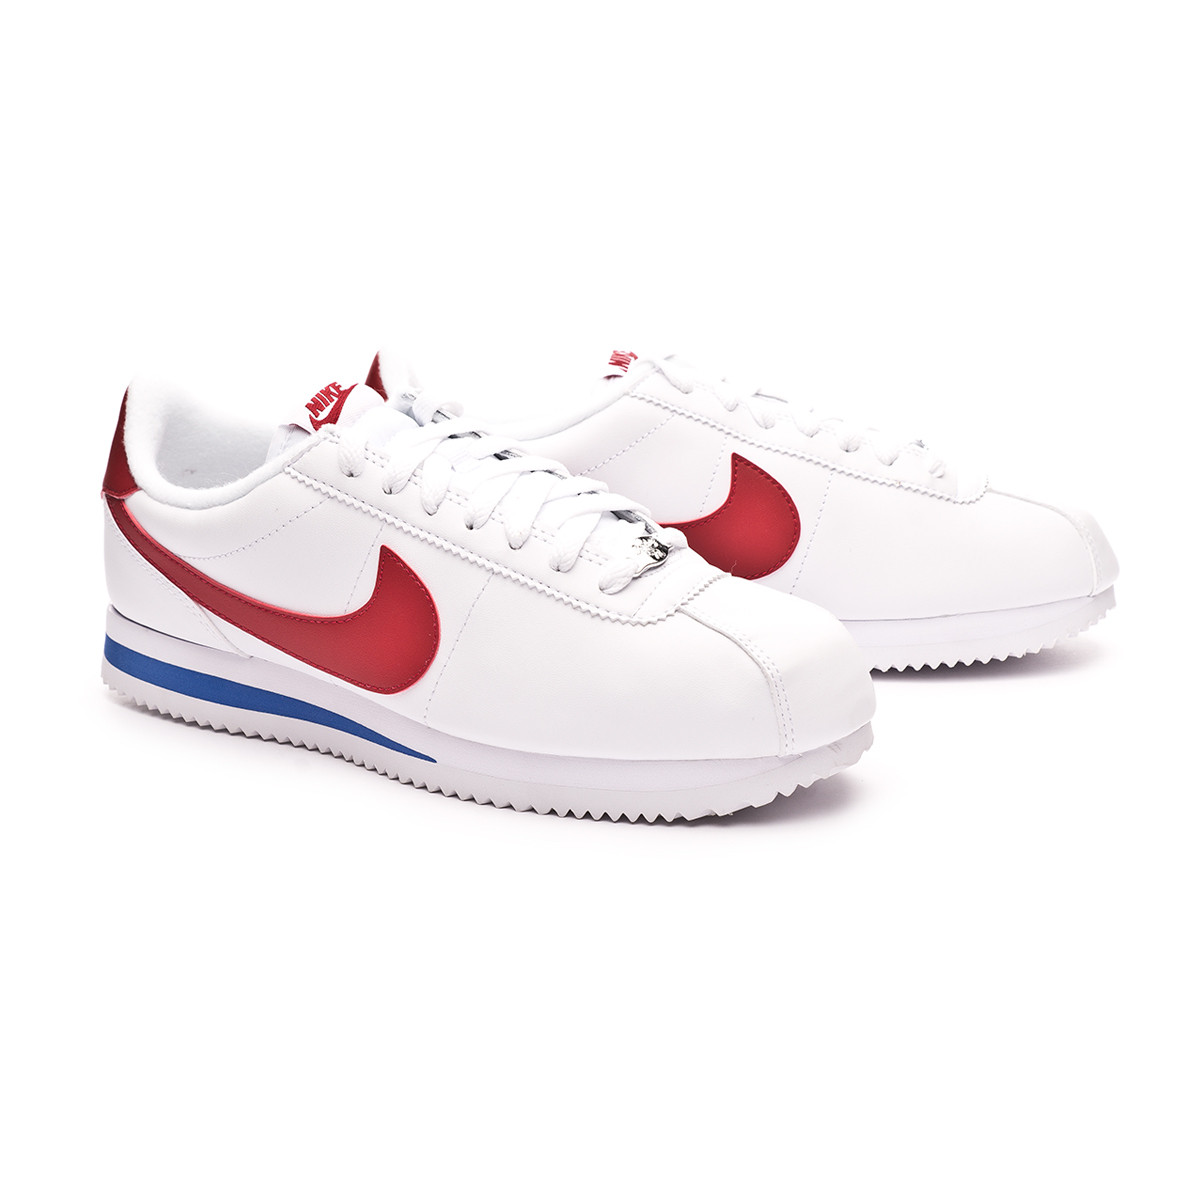 Nike Cortez Varsity Red Online Sale, UP TO 66% OFF